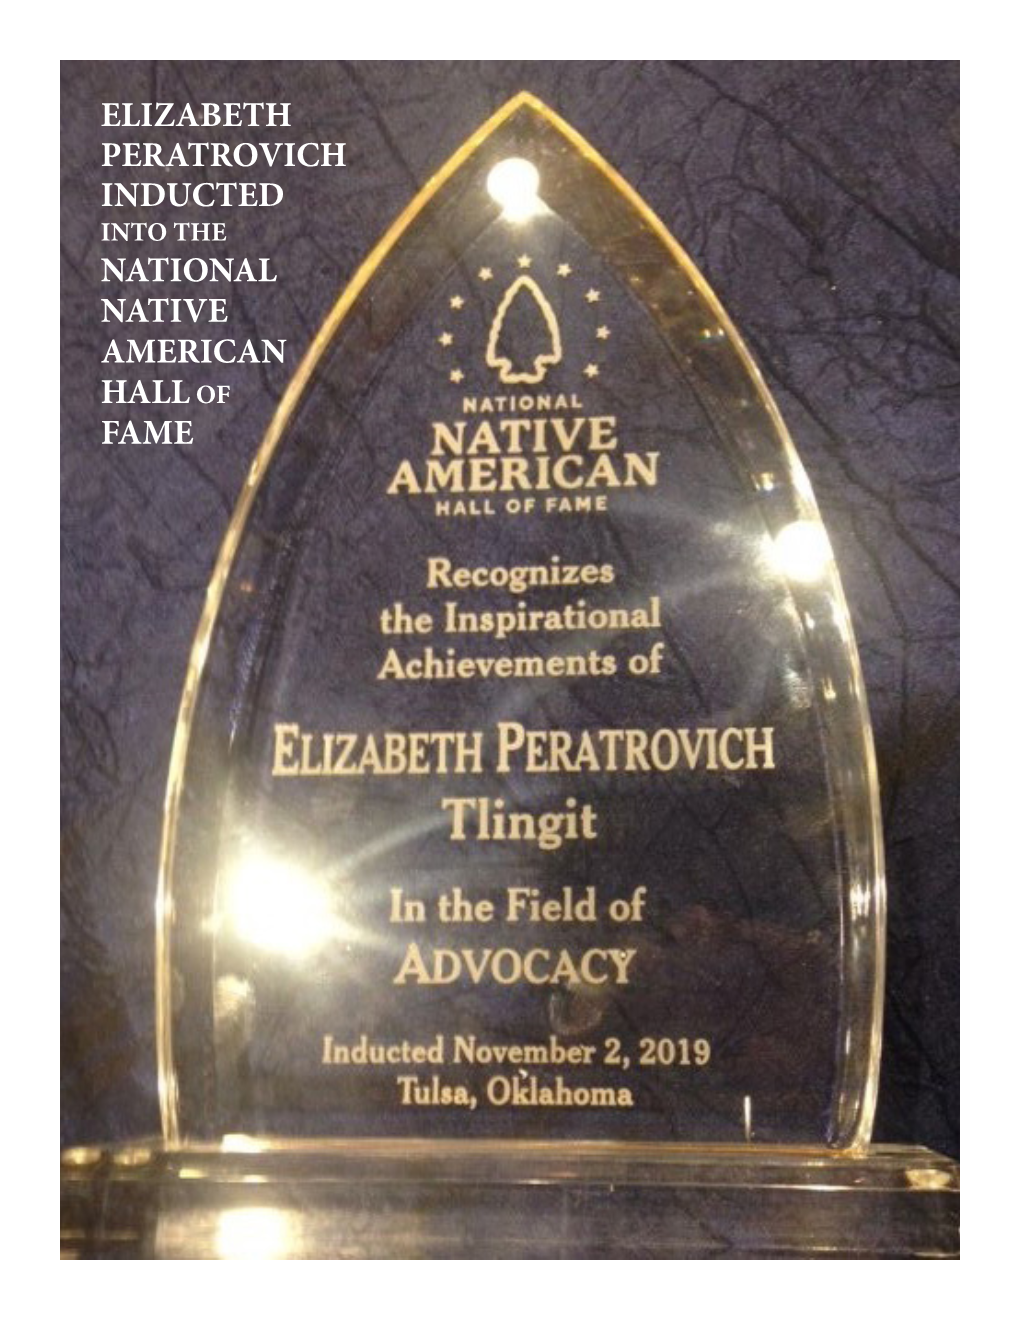 Elizabeth Peratrovich Inducted National Native